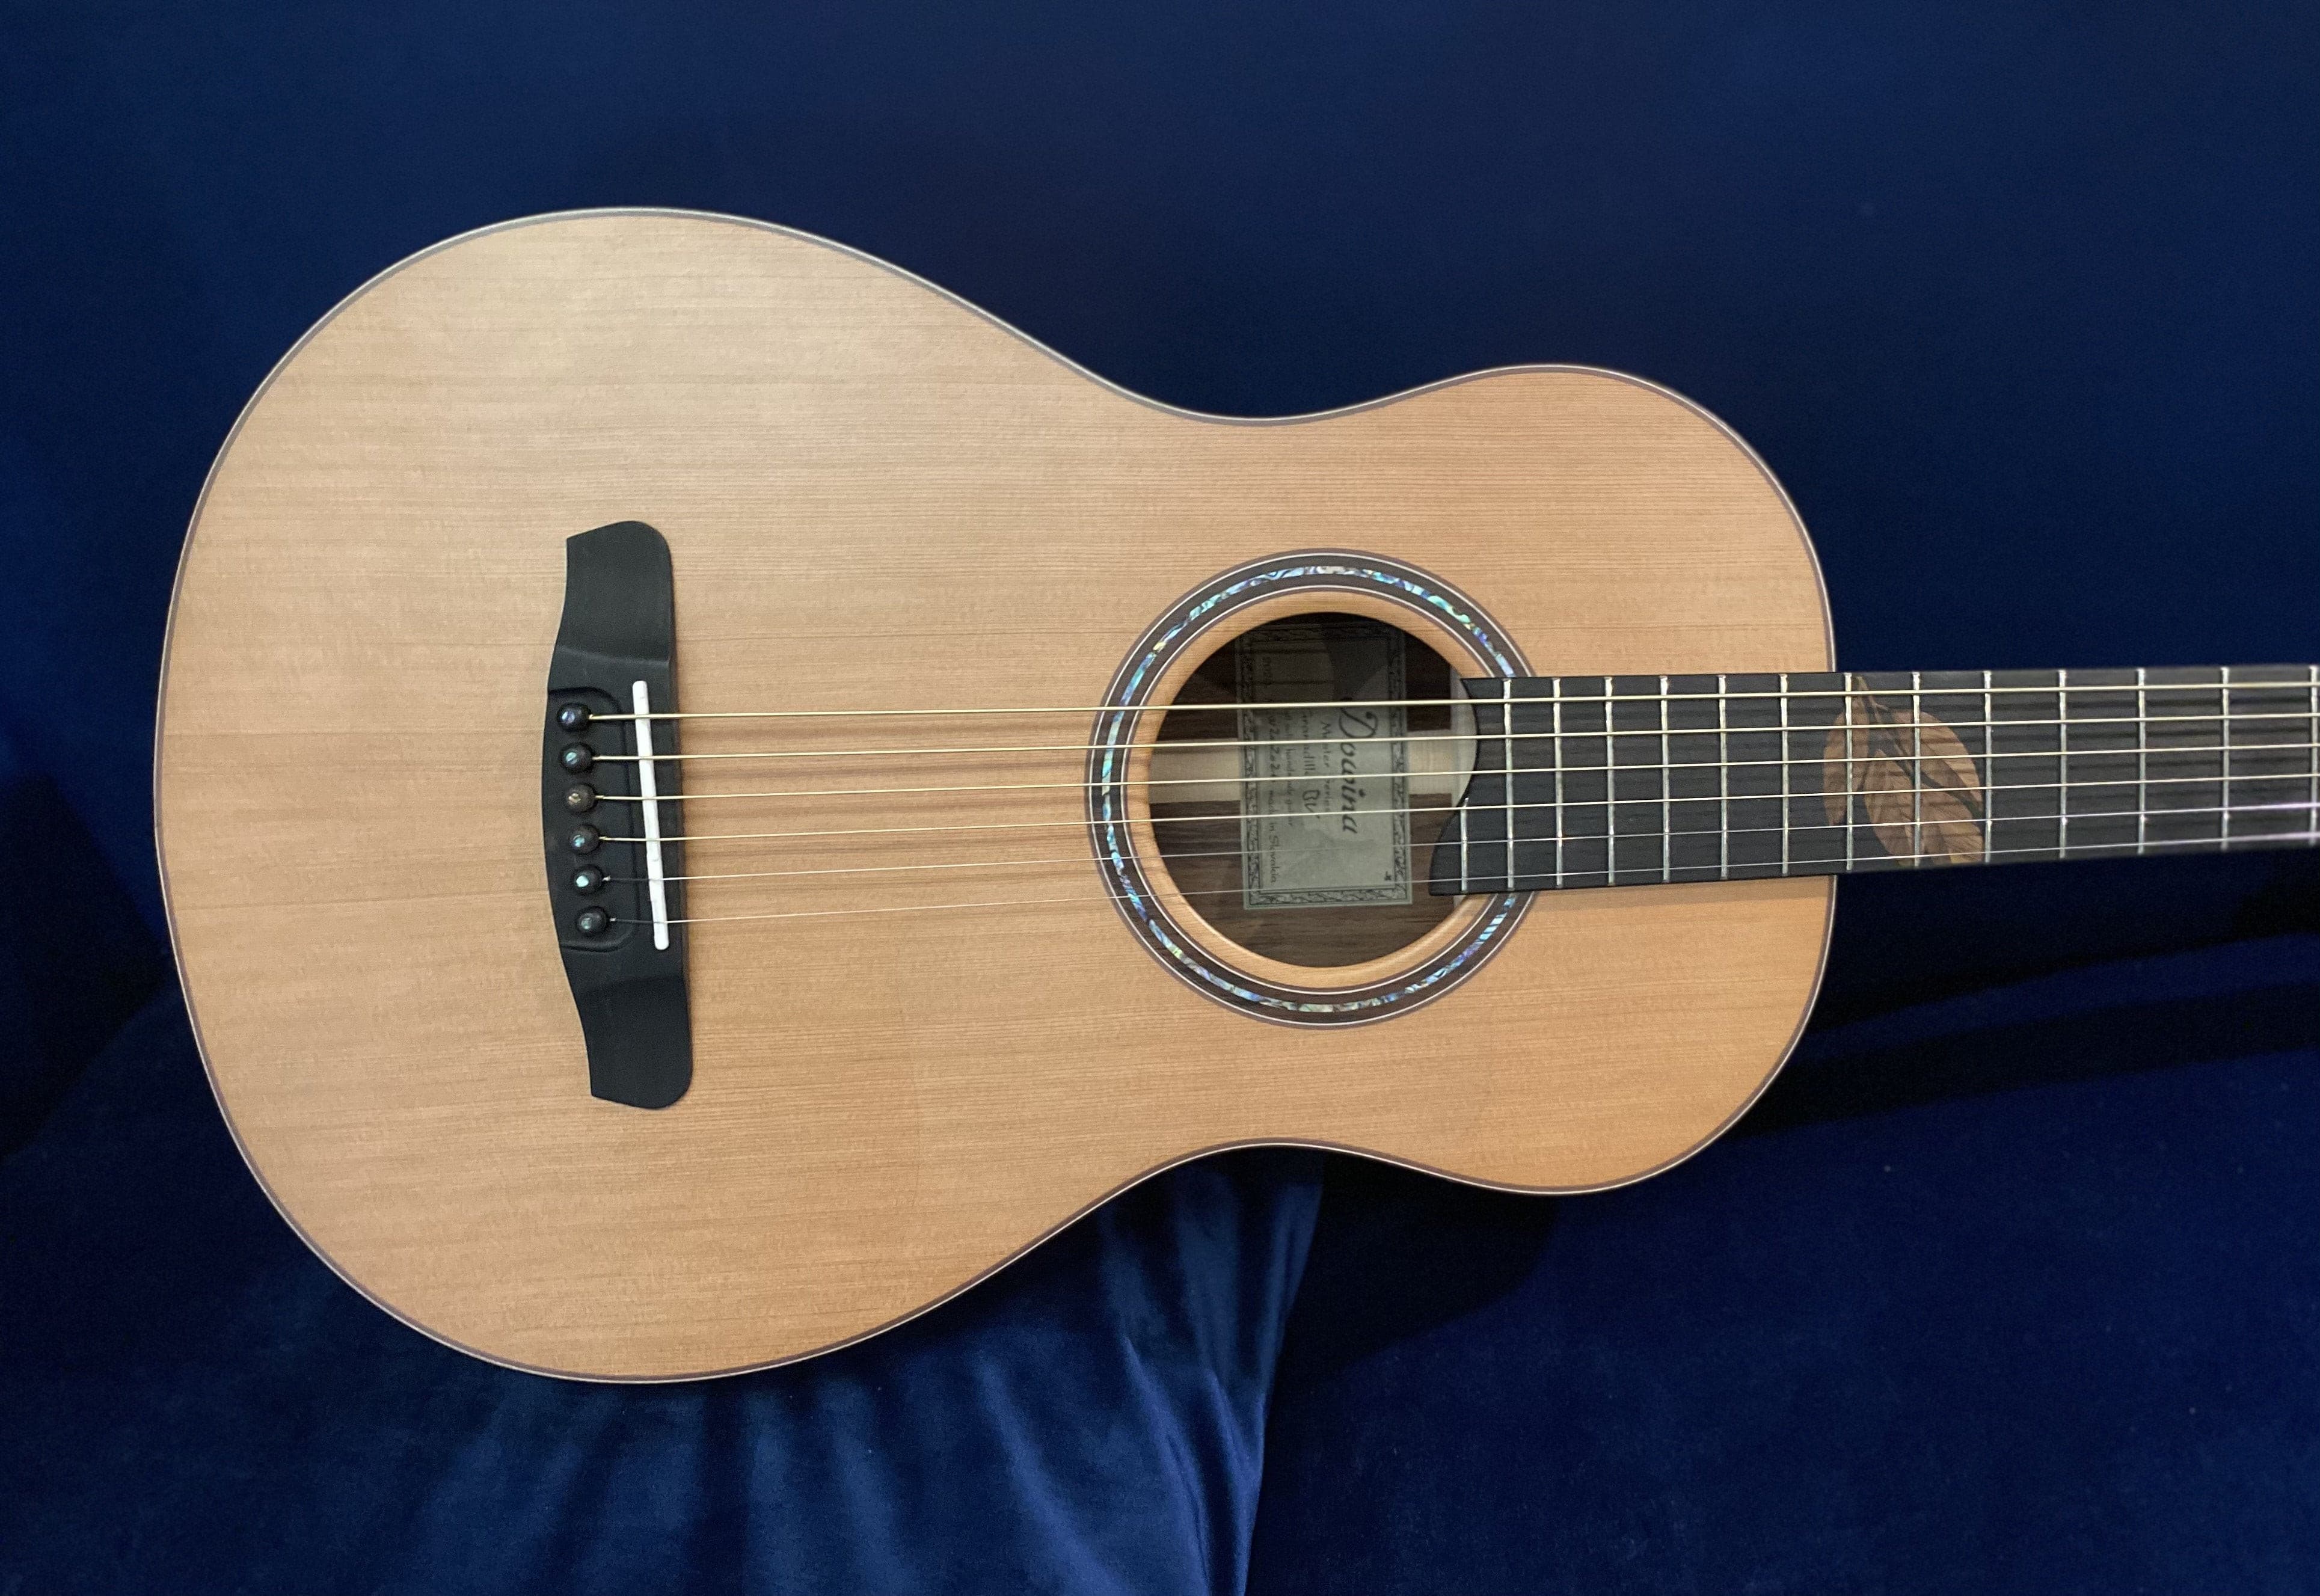 Dowina Master Build Madagascar Rosewood BV Custom With Slotted Headstock, Acoustic Guitar for sale at Richards Guitars.